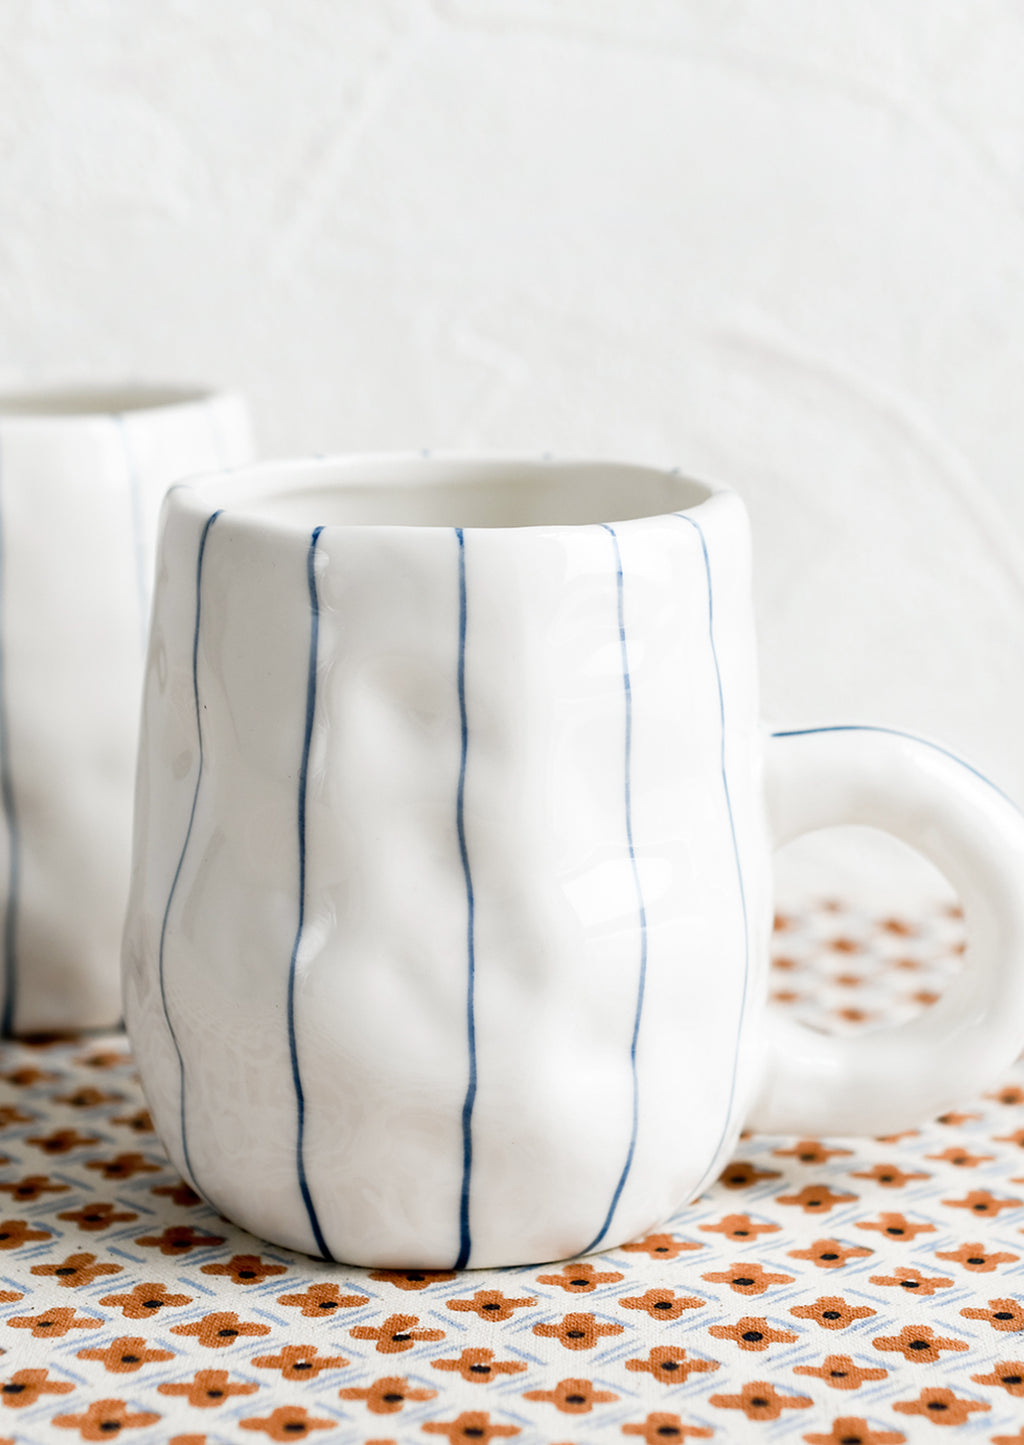 2: A pinched white mug with vertical thin blue stripes.